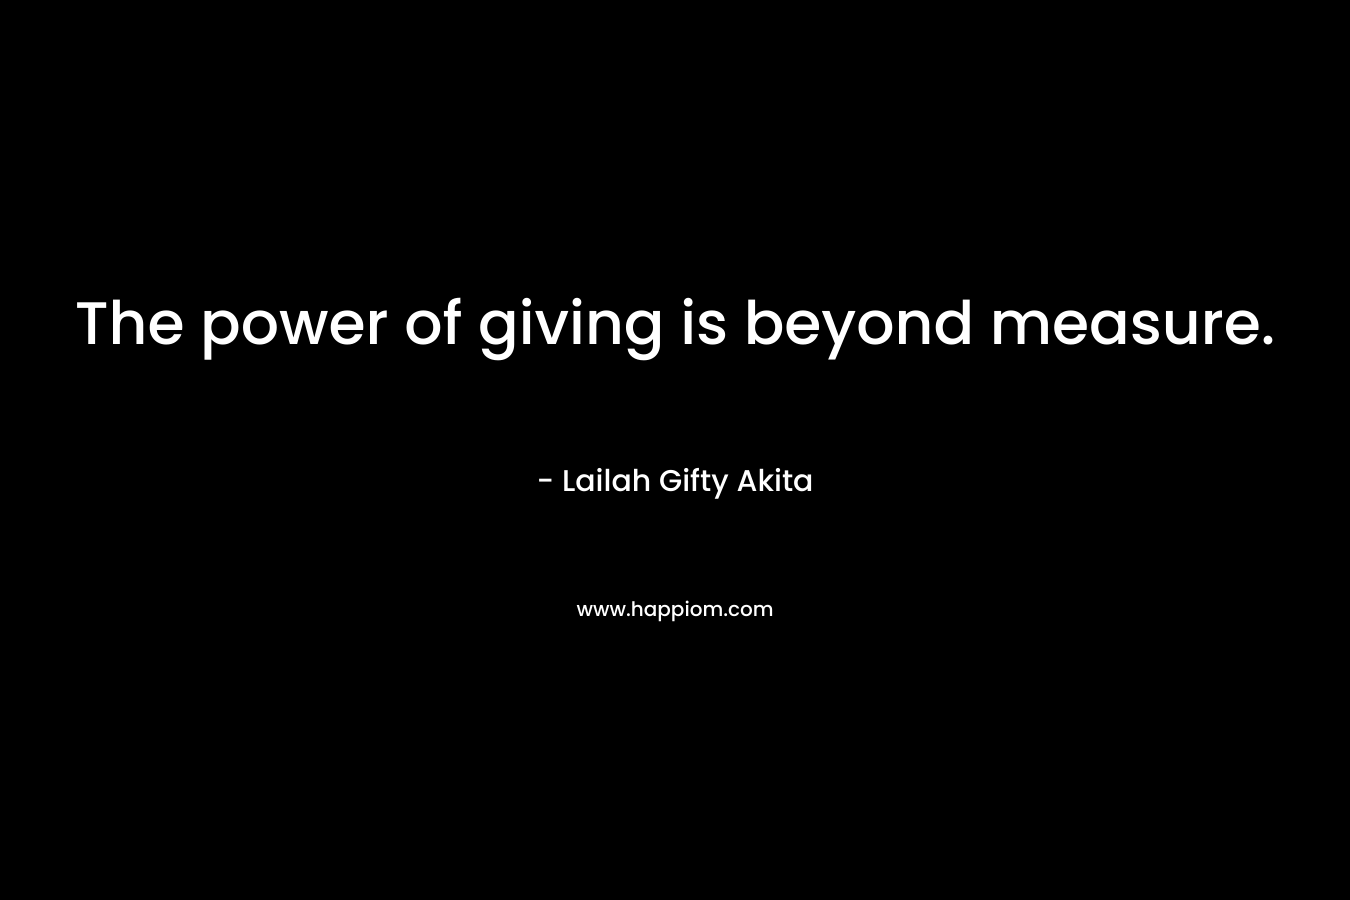 The power of giving is beyond measure.